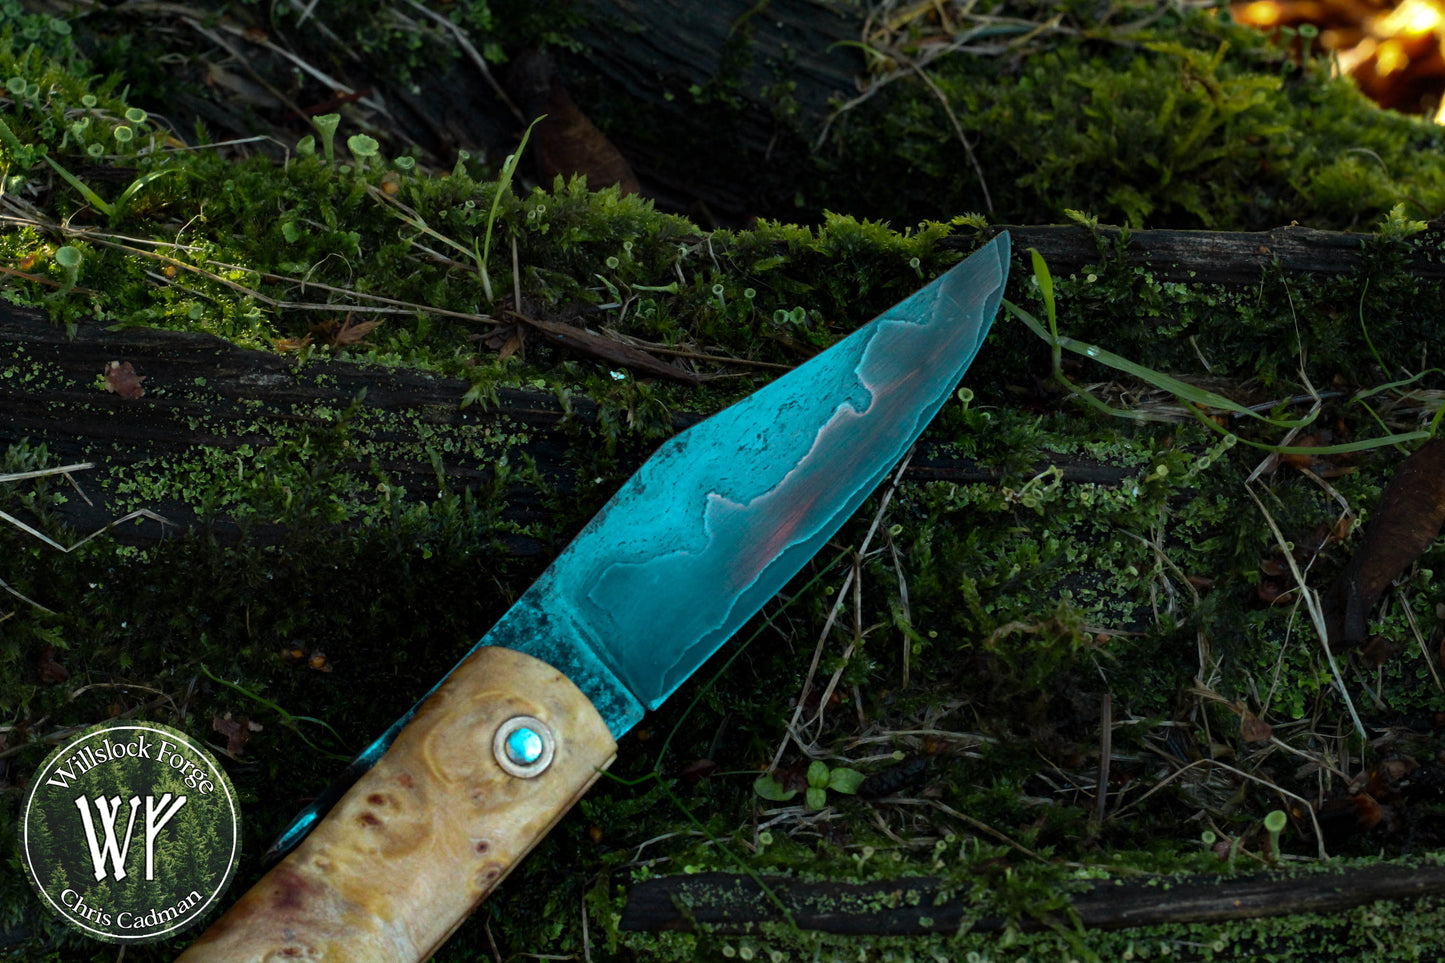 [RESERVED FOR HAGEN] Hand-forged Viking style friction folder /  Wrought Iron & Steel Blade / Wych Elm Burl Handle with steel liners / UK Legal Carry